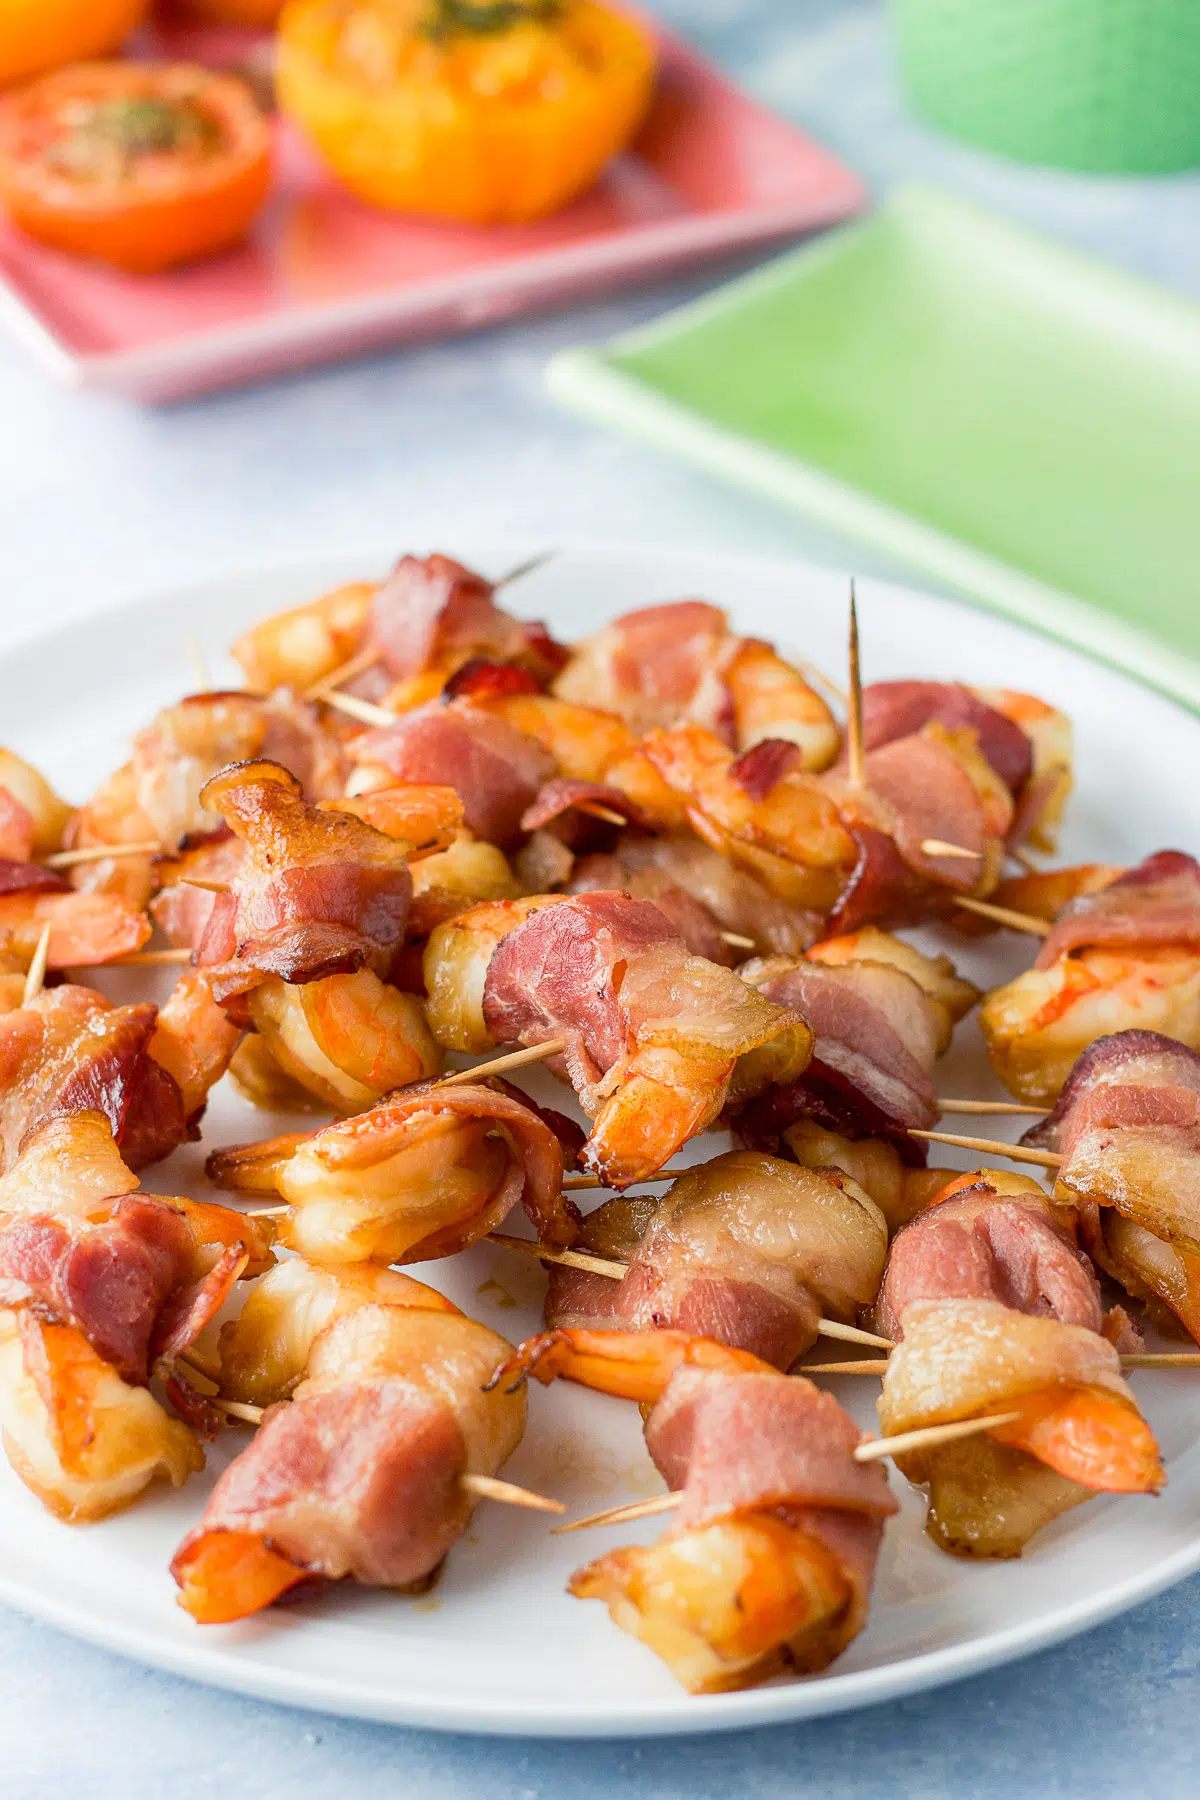 Shrimp wrapped in bacon on a white plate in front of tomatoes